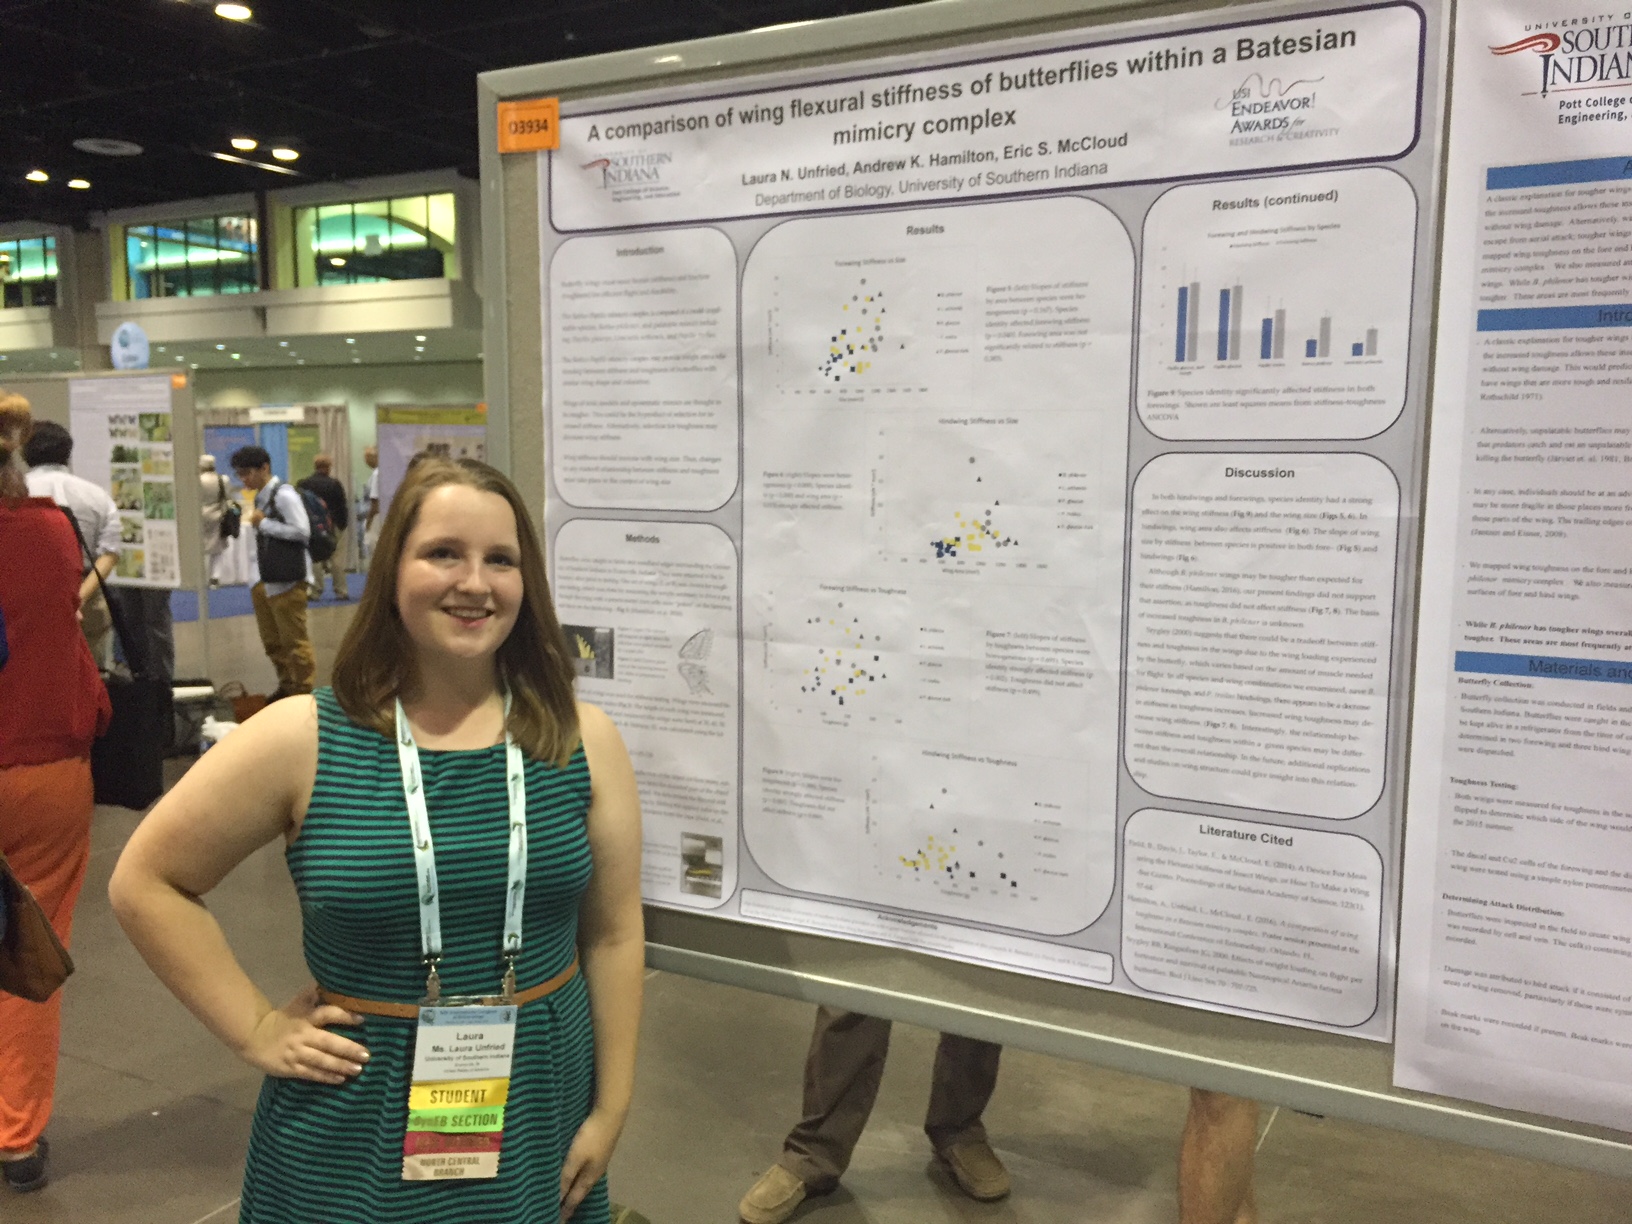 USI Student Laura Unfried Presents her research at an International Conference